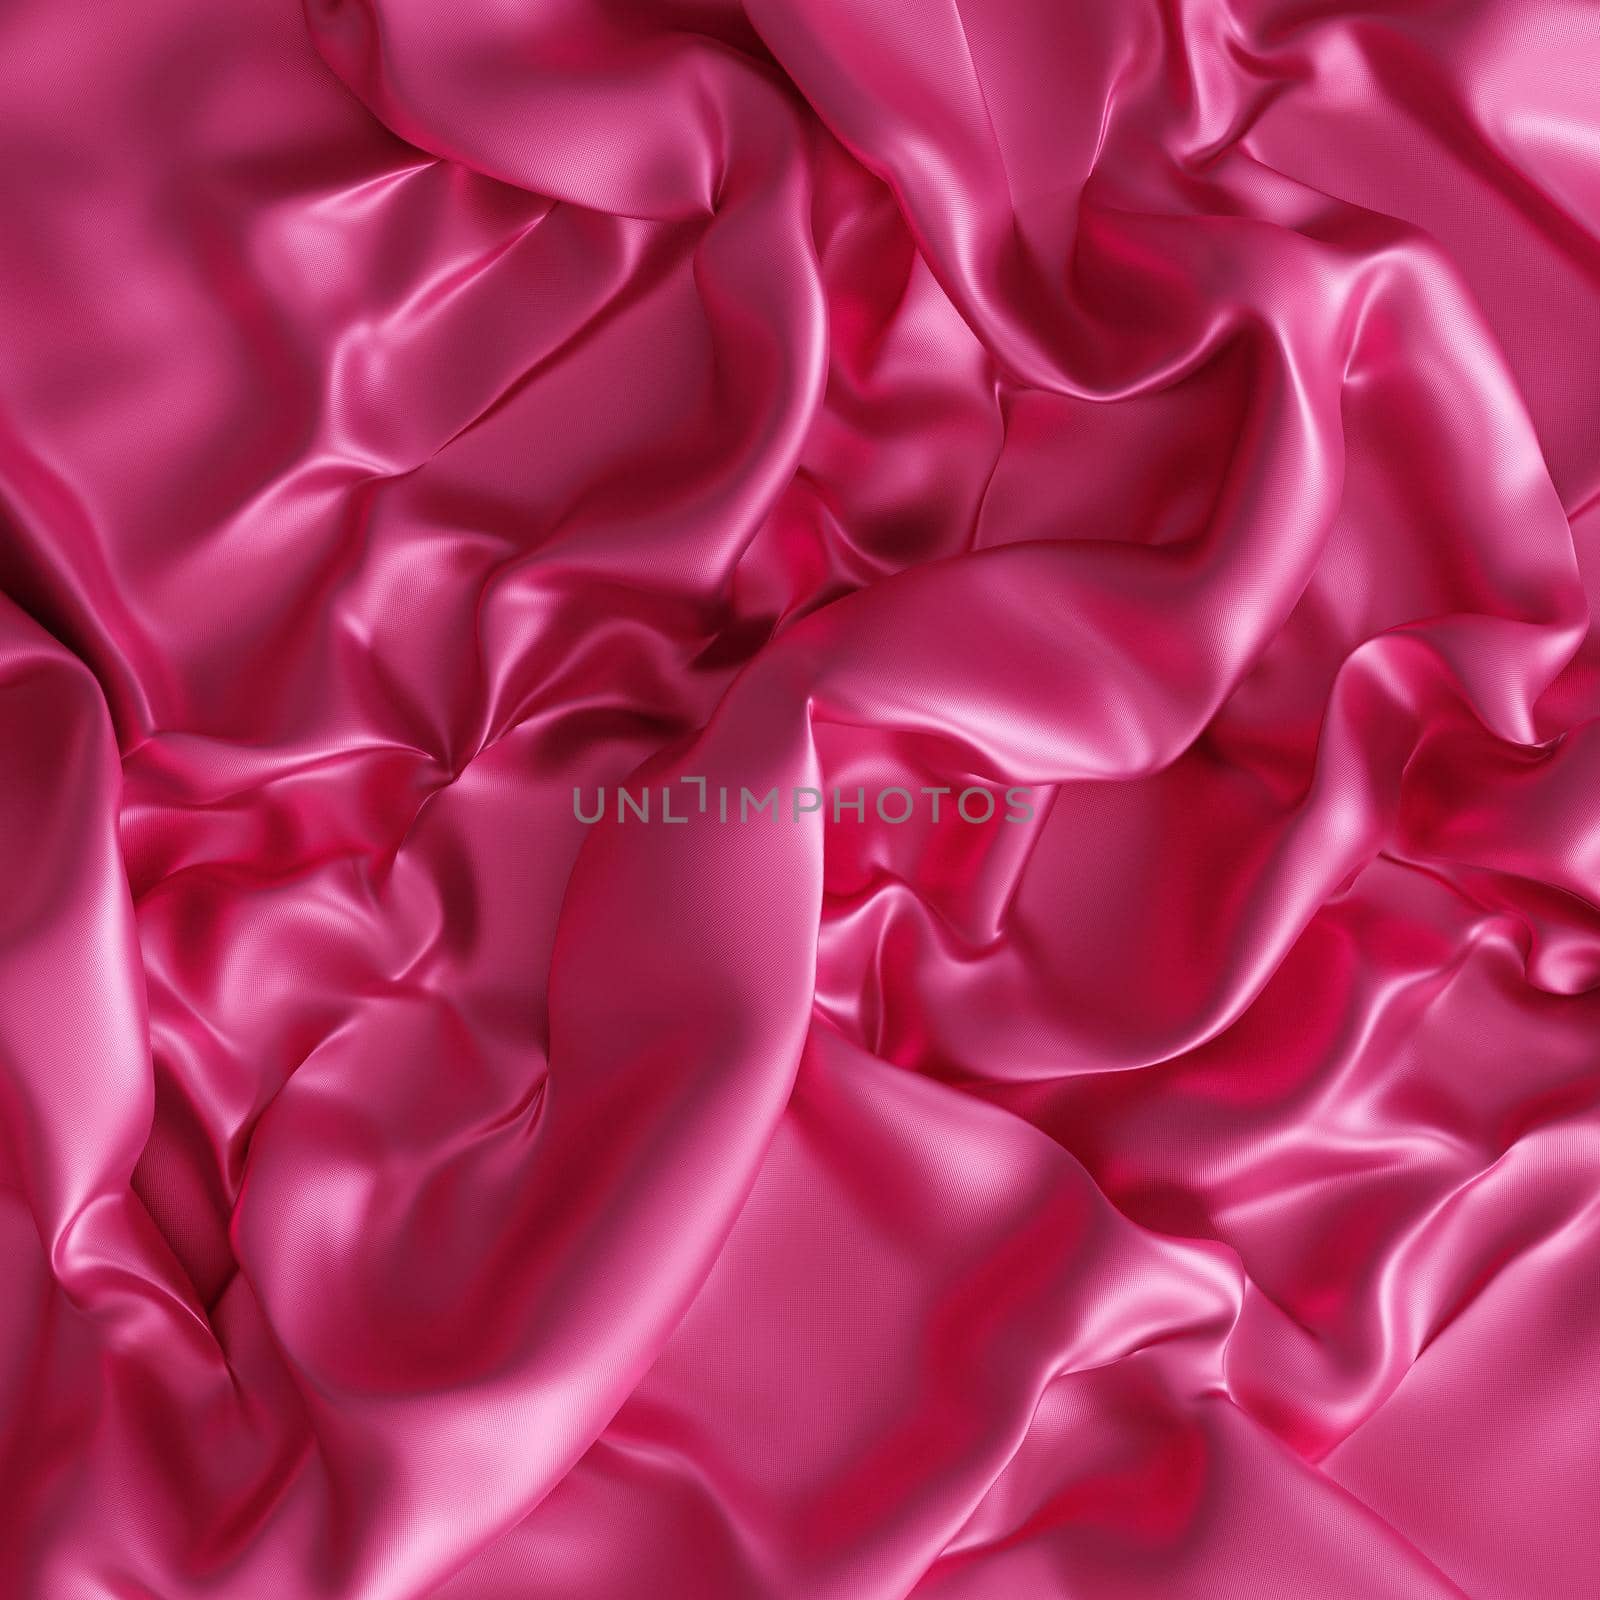 Pink shiny satin or silk textile, luxury cloth with folds, 3d rendering background by Frostroomhead